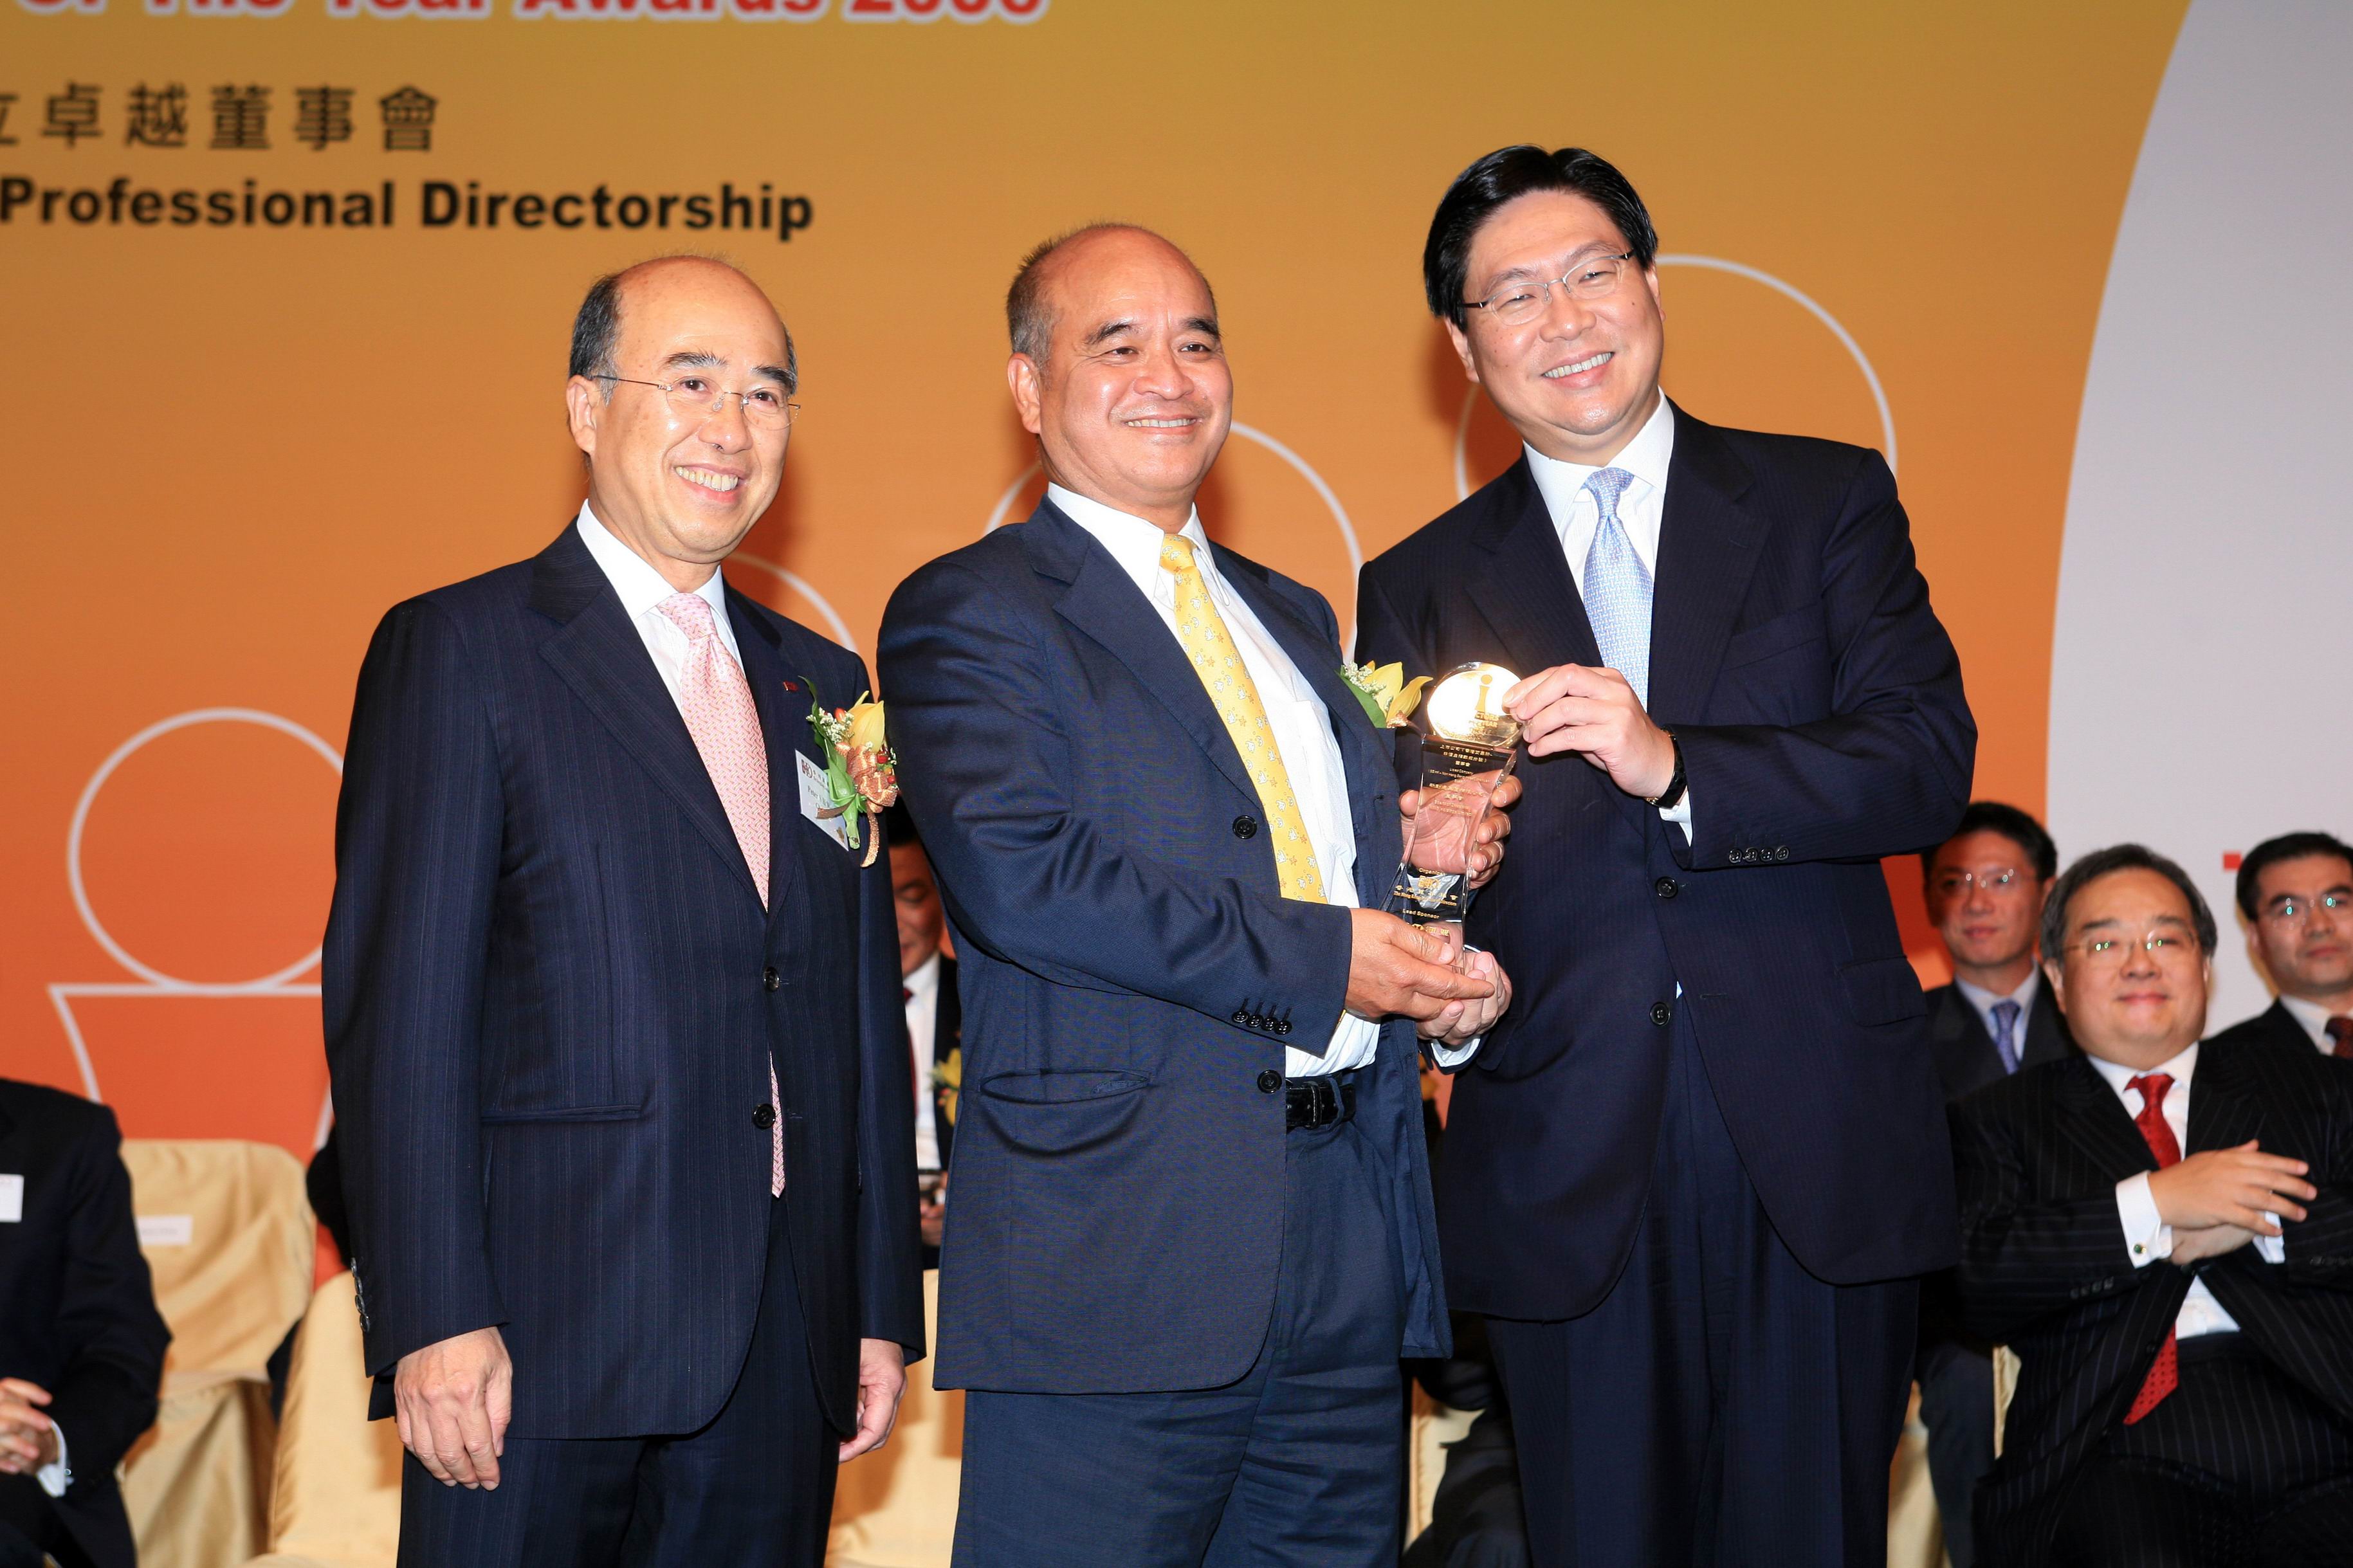 NWS Holdings honoured Directors of the Year Awards 2006